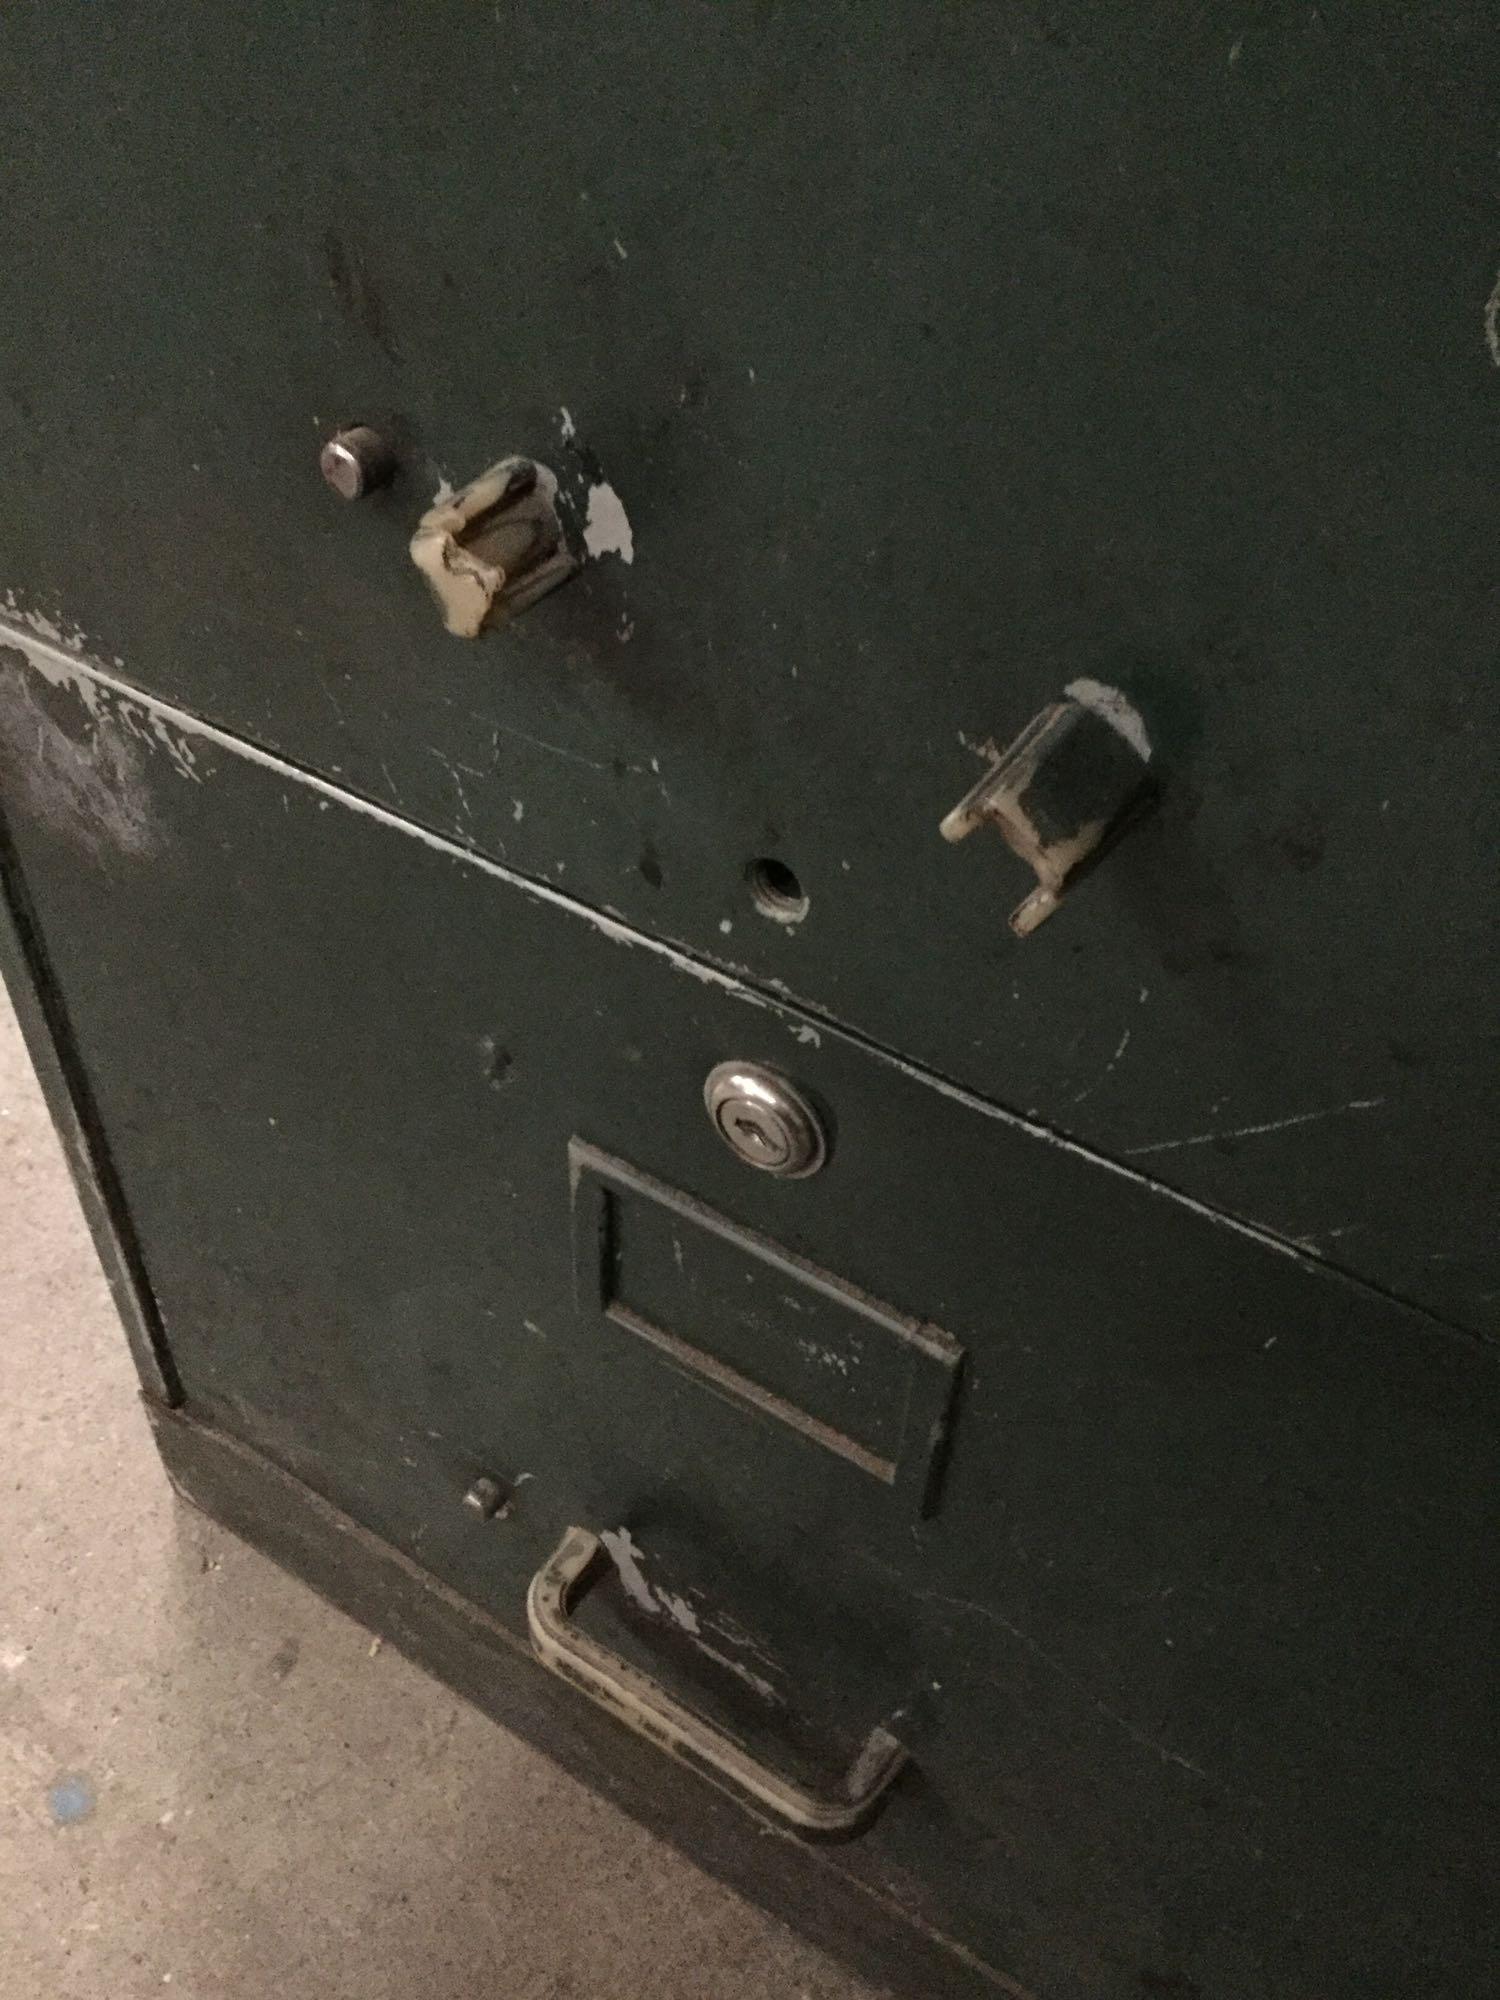 Vintage Seattle US Navy filing cabinet. One broken handle. approx 64x24x18 inches.